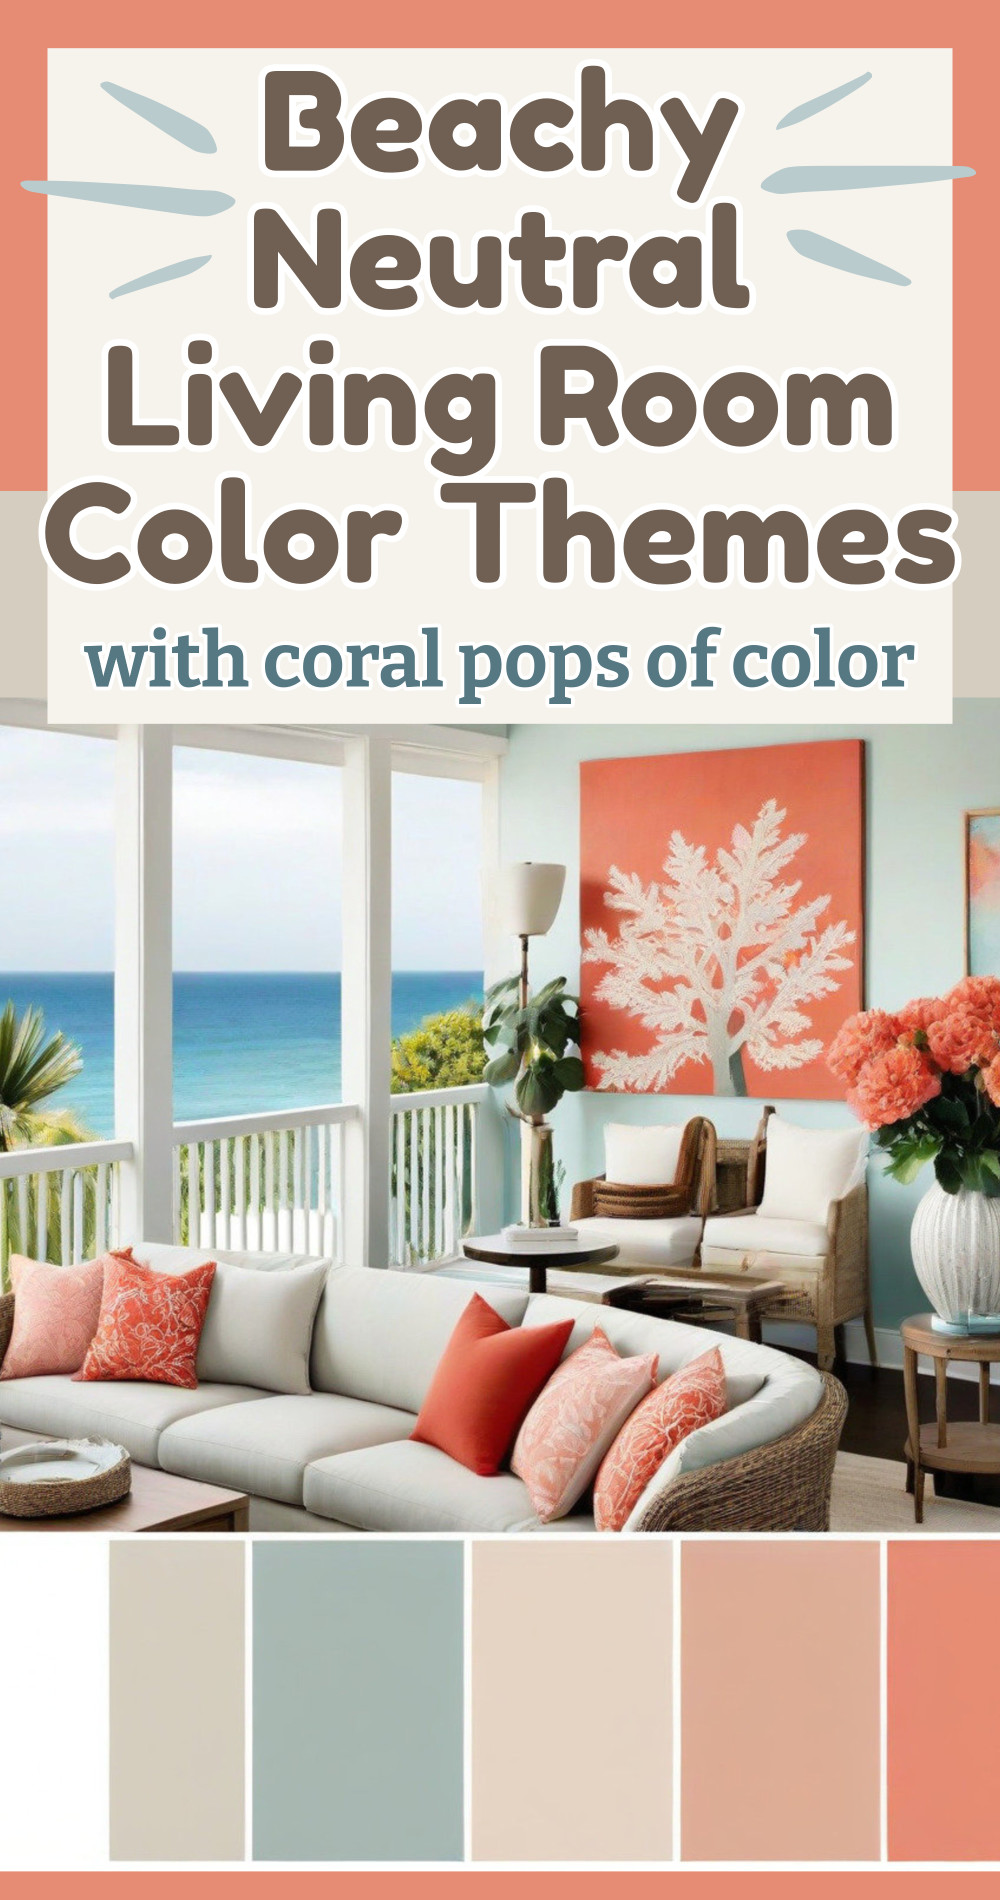 Beachy Neutral Living Room Color Themes With Cozy Pops of Chic Color Colors